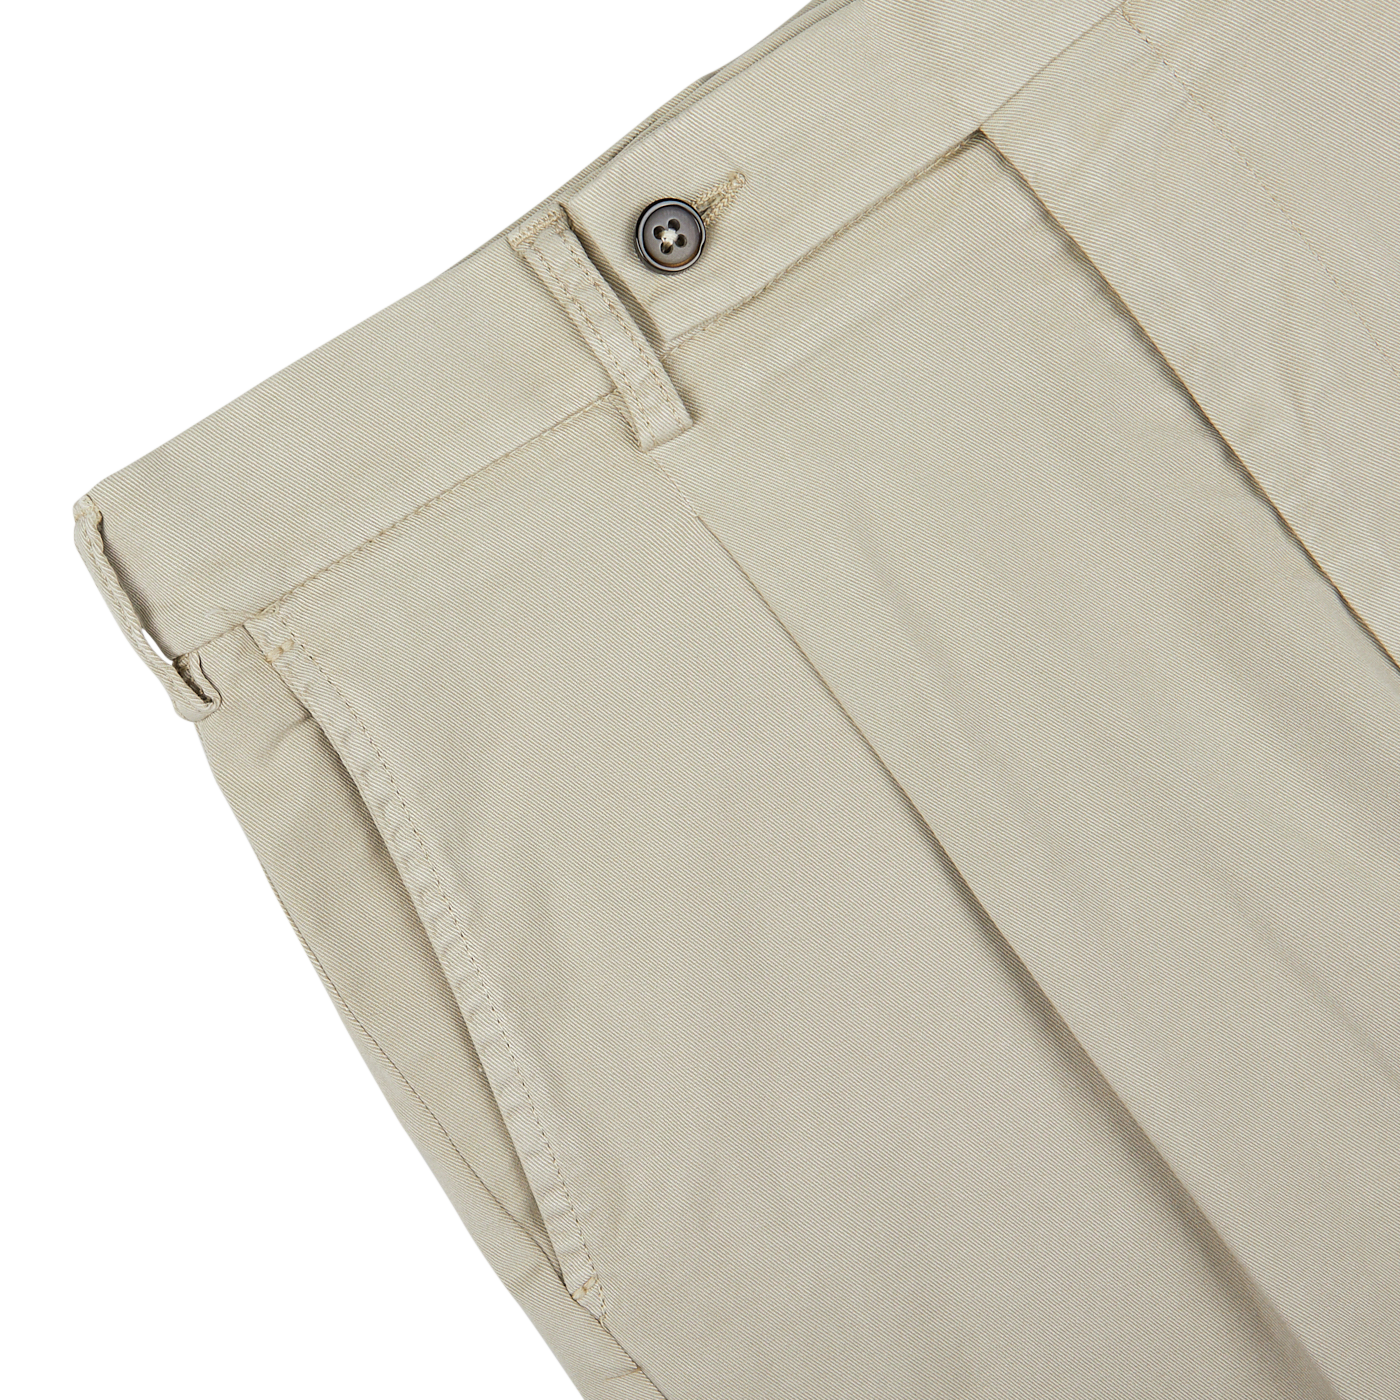 Neutral-toned Berwich Sabbia Beige Cotton Blend Pleated Bermuda shorts with a button fastening visible.